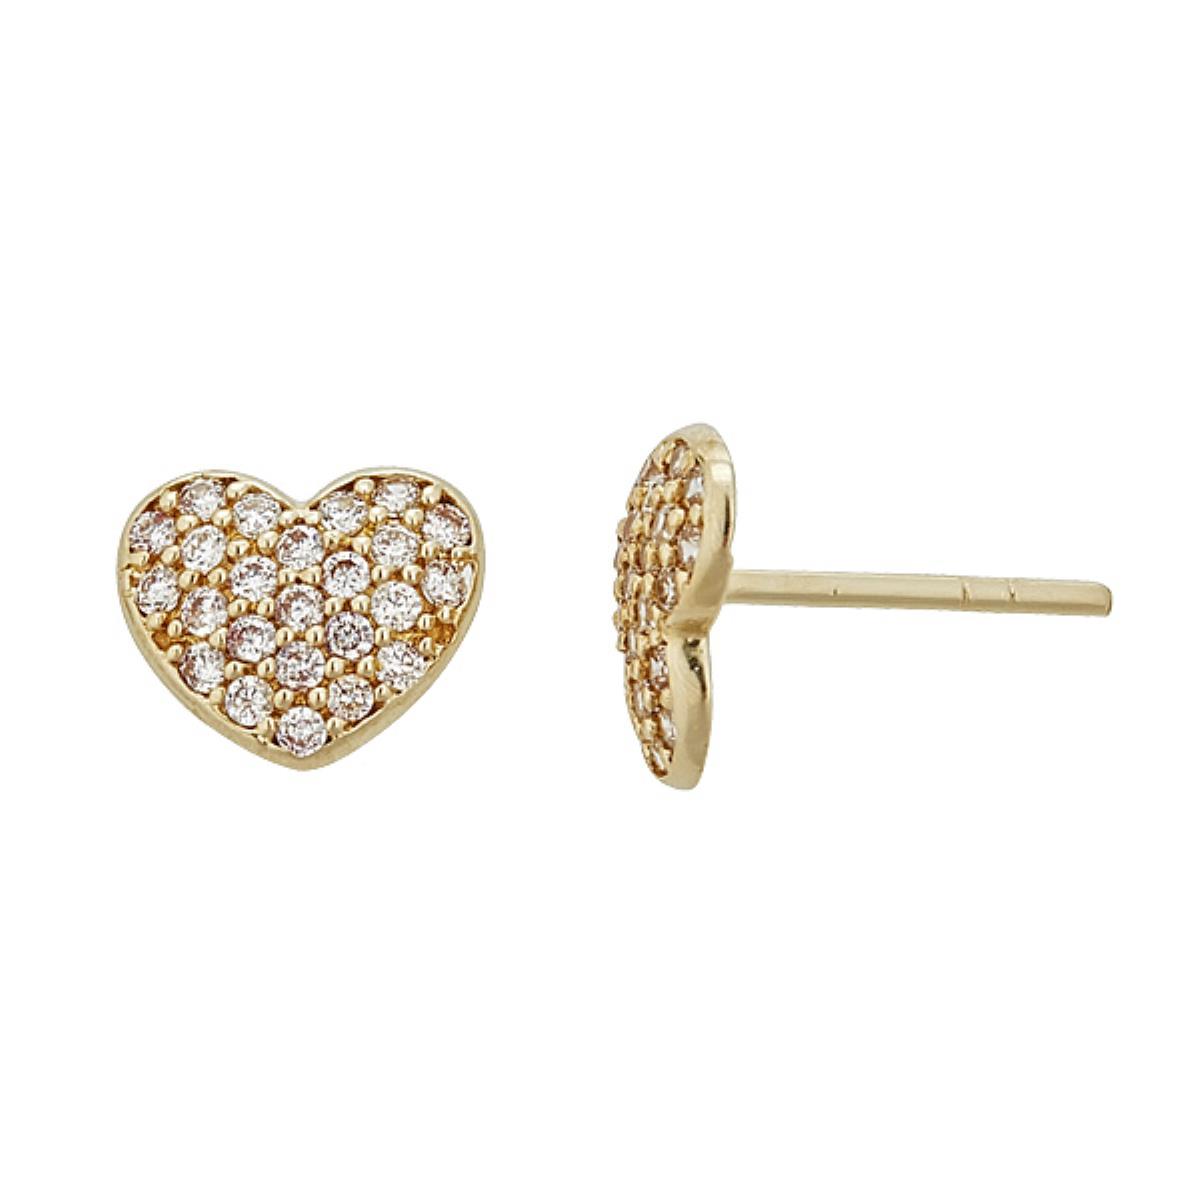 10K Yellow Gold Micropave CZ  Heart Stud Earrings with Bubble Silicone Backs